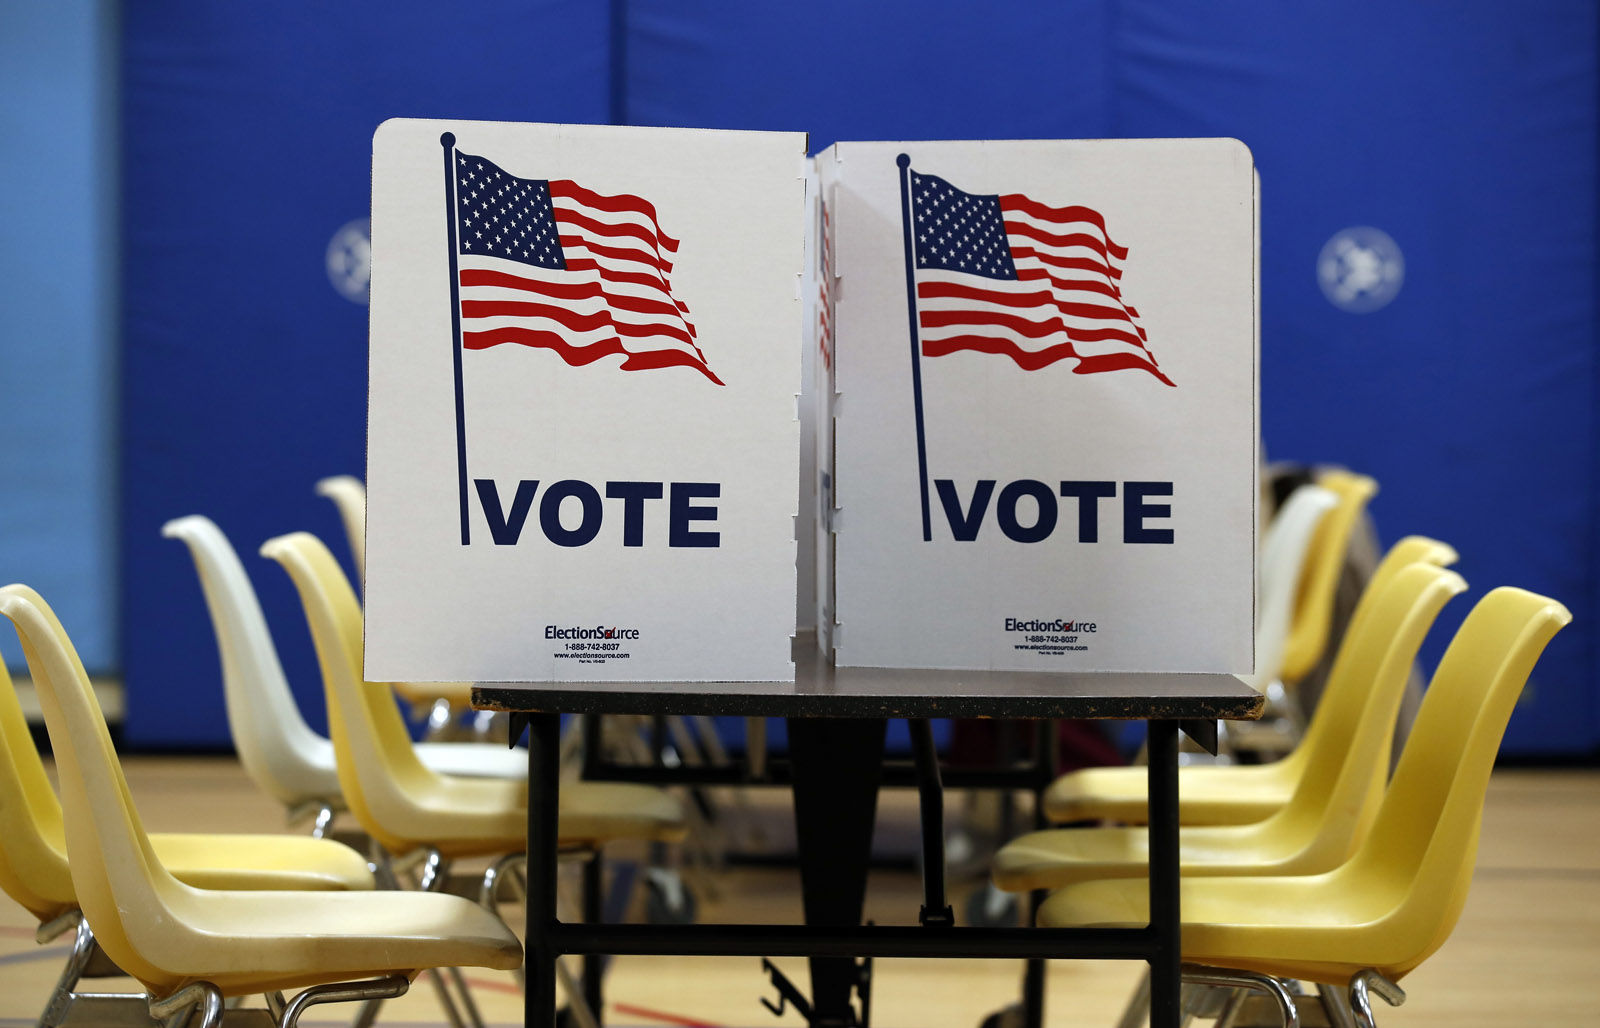 Empty chairs are seen at a polling place Tuesday, Nov. 7, 2017, in Alexandria, Va. (AP Photo/Alex Brandon)